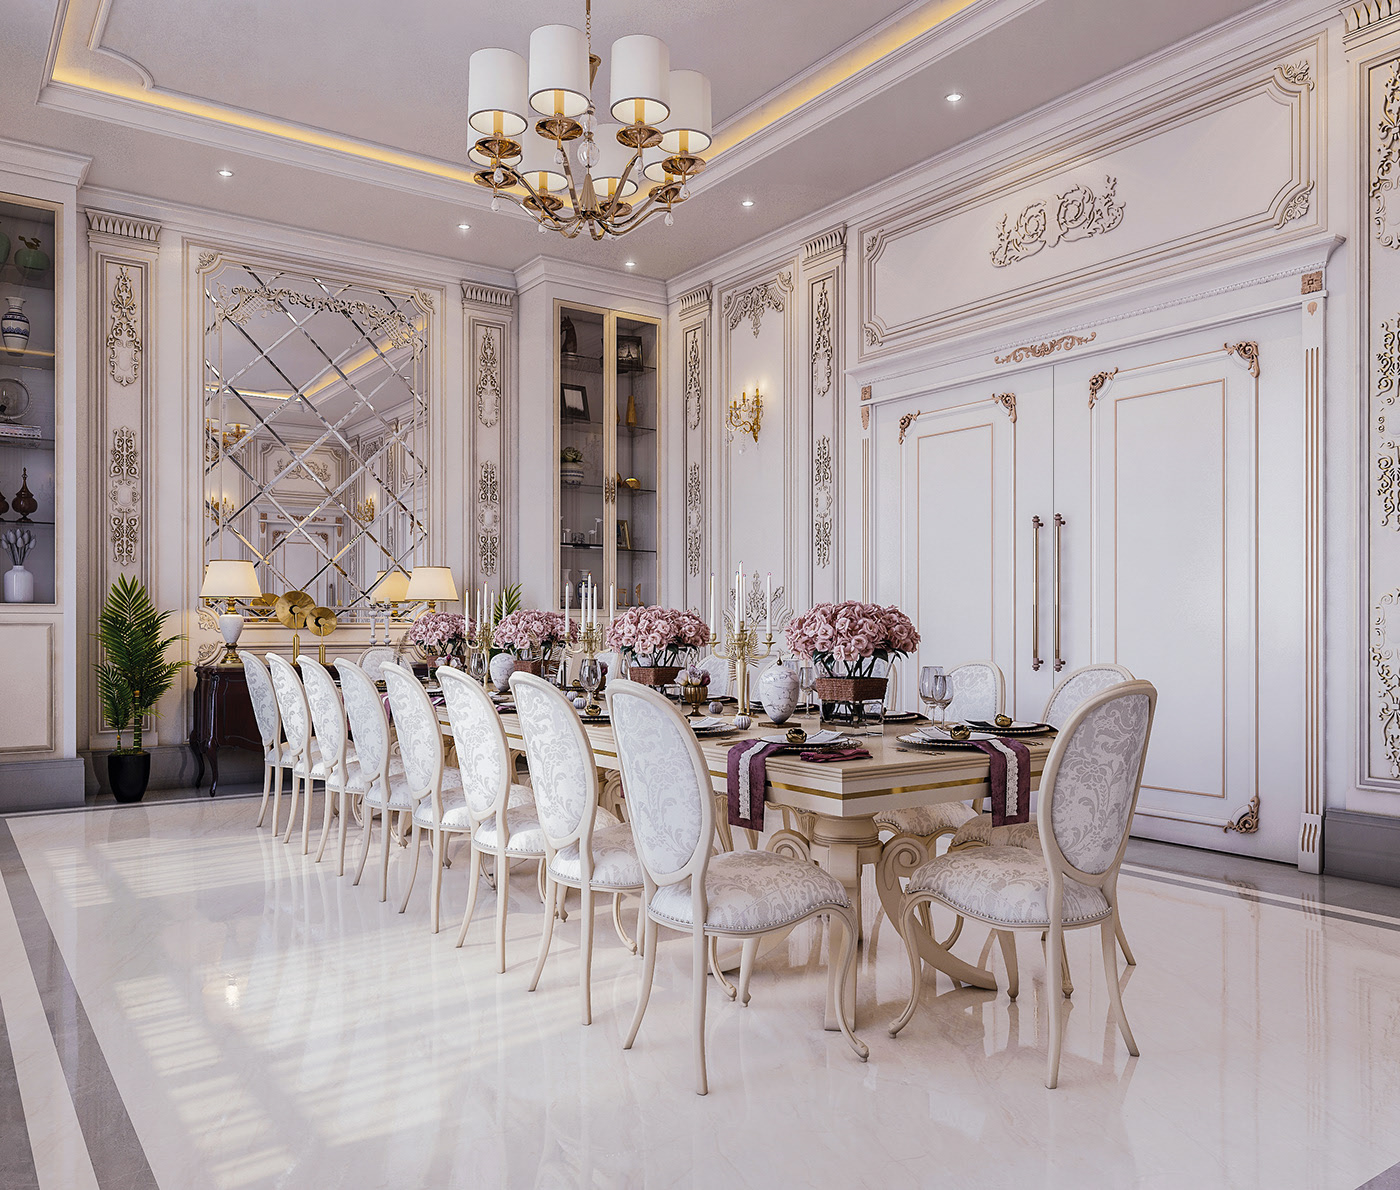 Grand Dining Room Fit For A Palace - Classical Interior Design